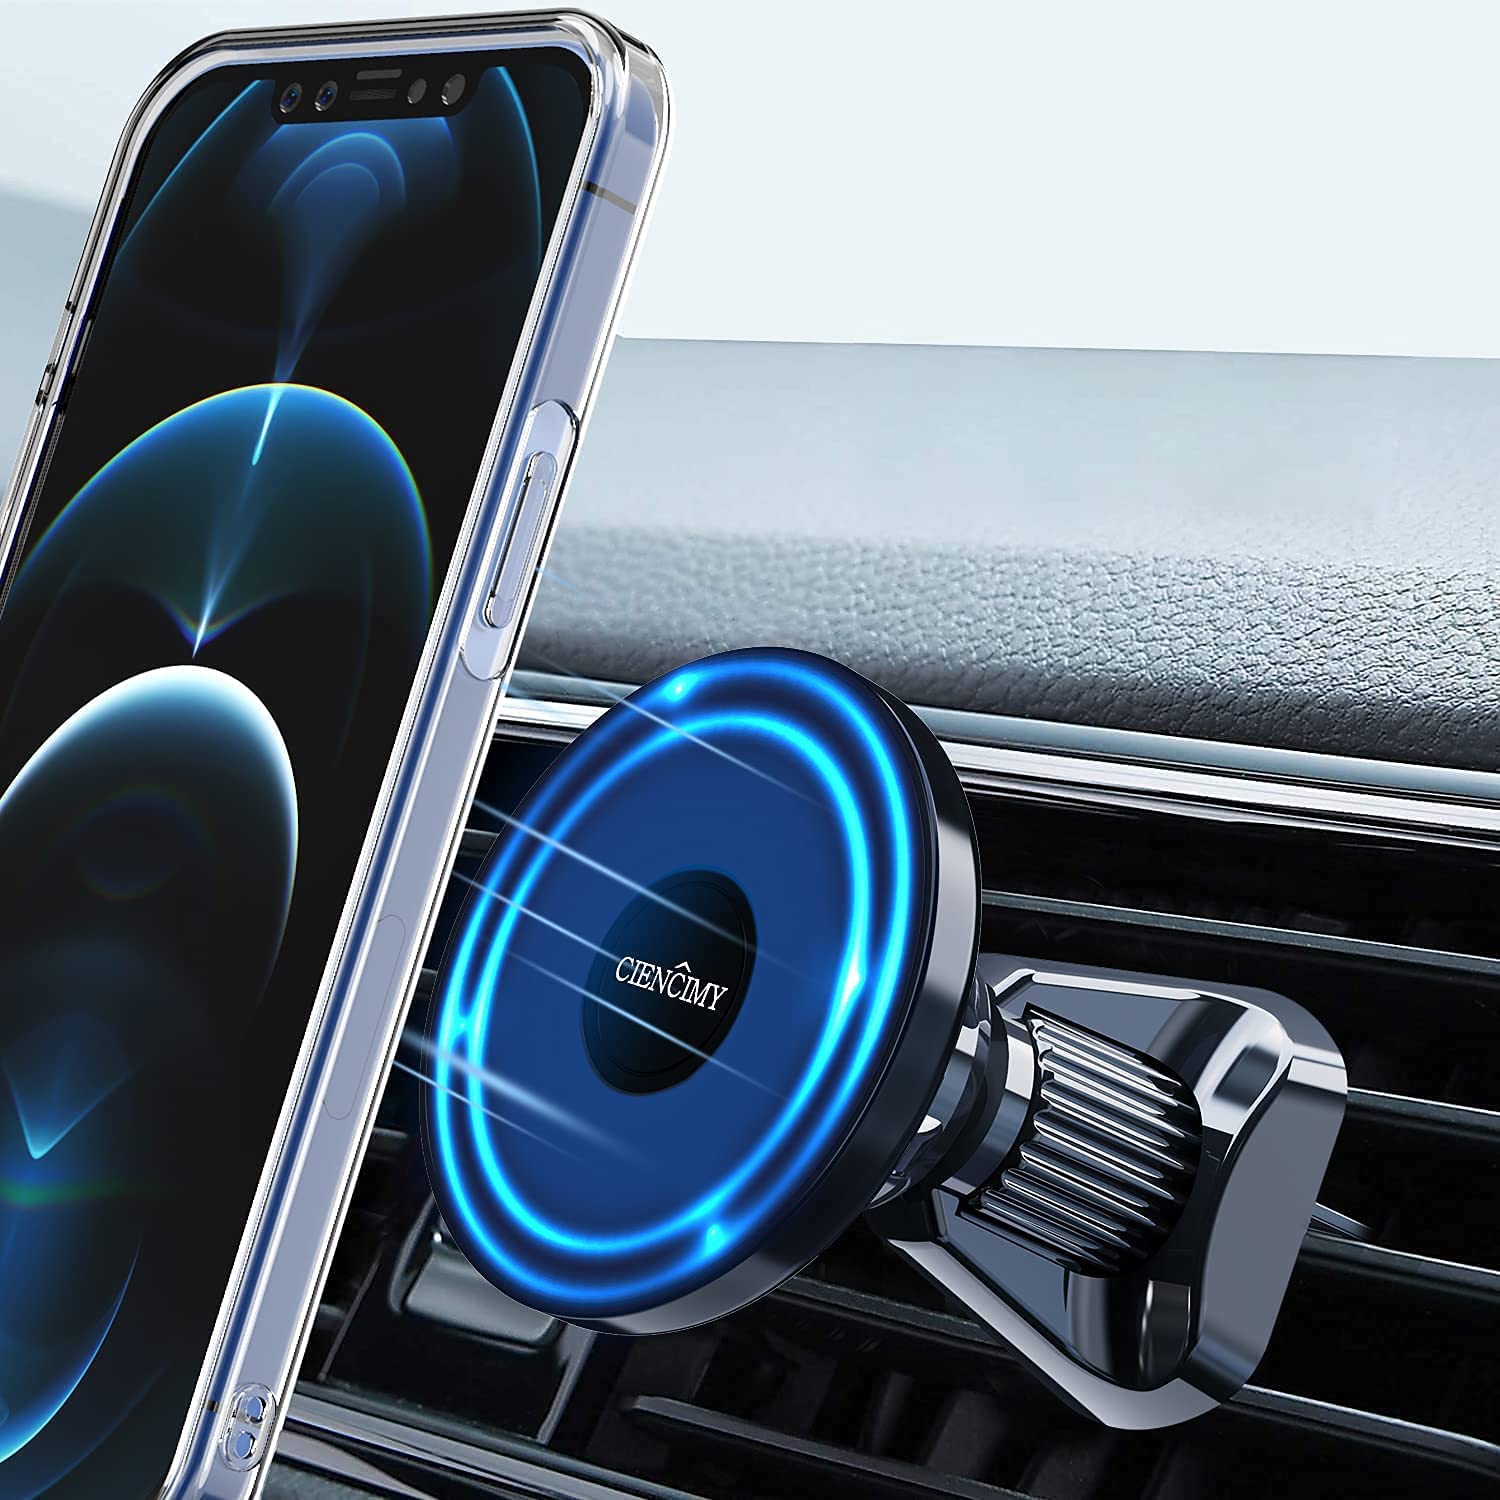 Ciencimy Magnetic Car Mount Compatible with MagSafe and iPhone 13 Pro Max Mini/ 12 Pro Max Mini, 360° Adjustable Strong Magnet Air Vent Phone Holder $13.59